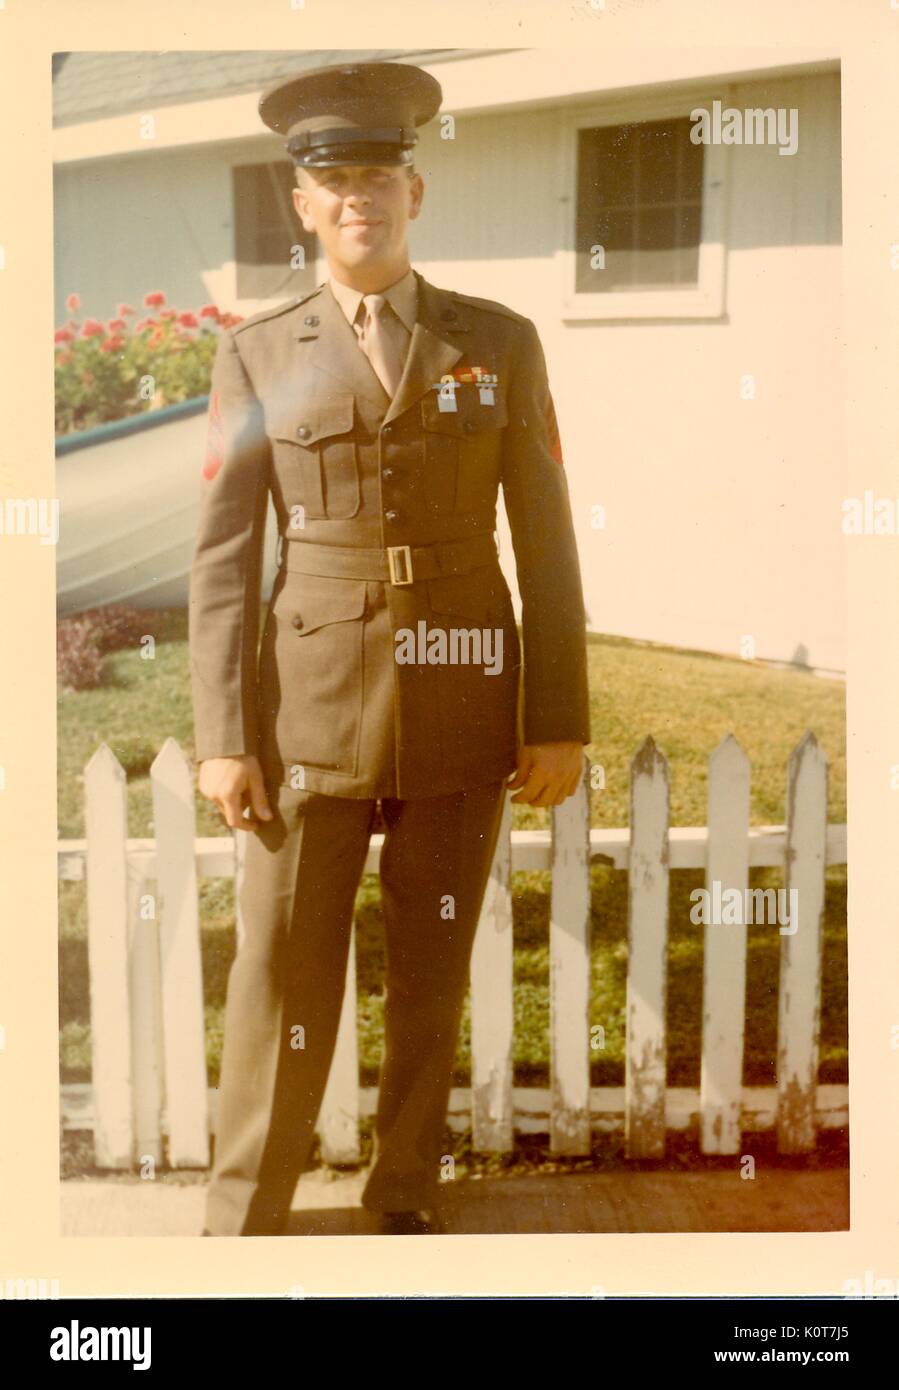 A photograph of United States Marine Charles M. Bollinger in his dress uniform that features his military ribbons and badges, he was a radio operator in the 2nd Battalion 4th Marines, 1968. Stock Photo